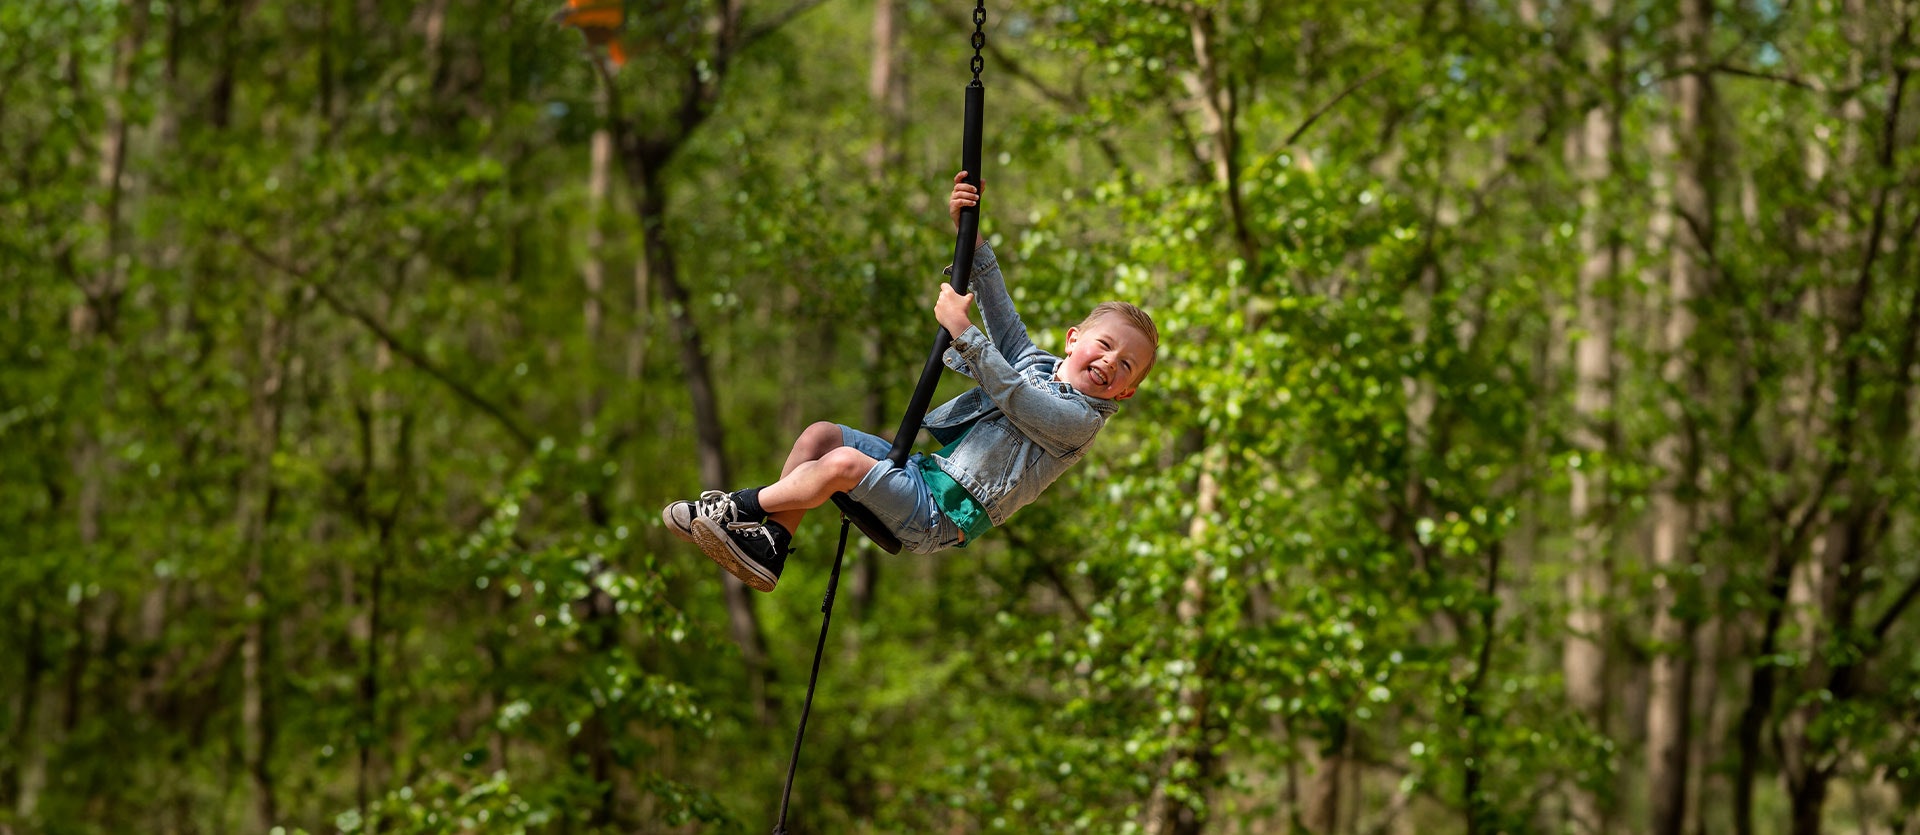 A child plays on a zip line in BeWILDerwood